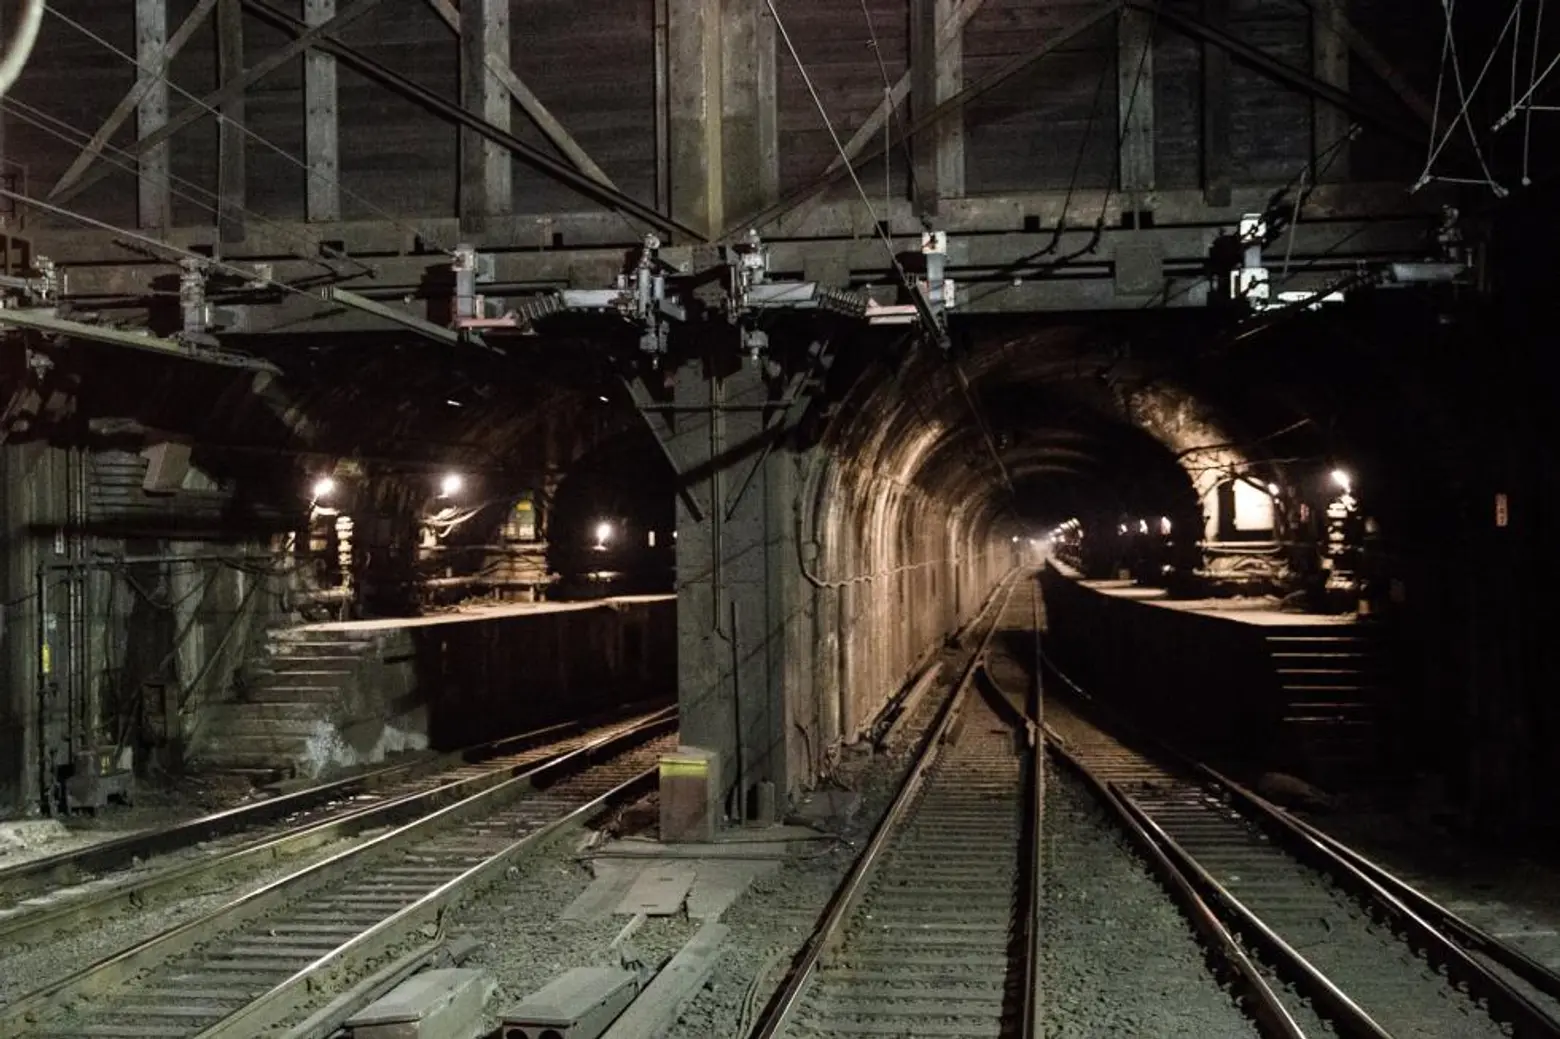 U.S. Department of Transportation backs out of group overseeing Hudson River tunnel project